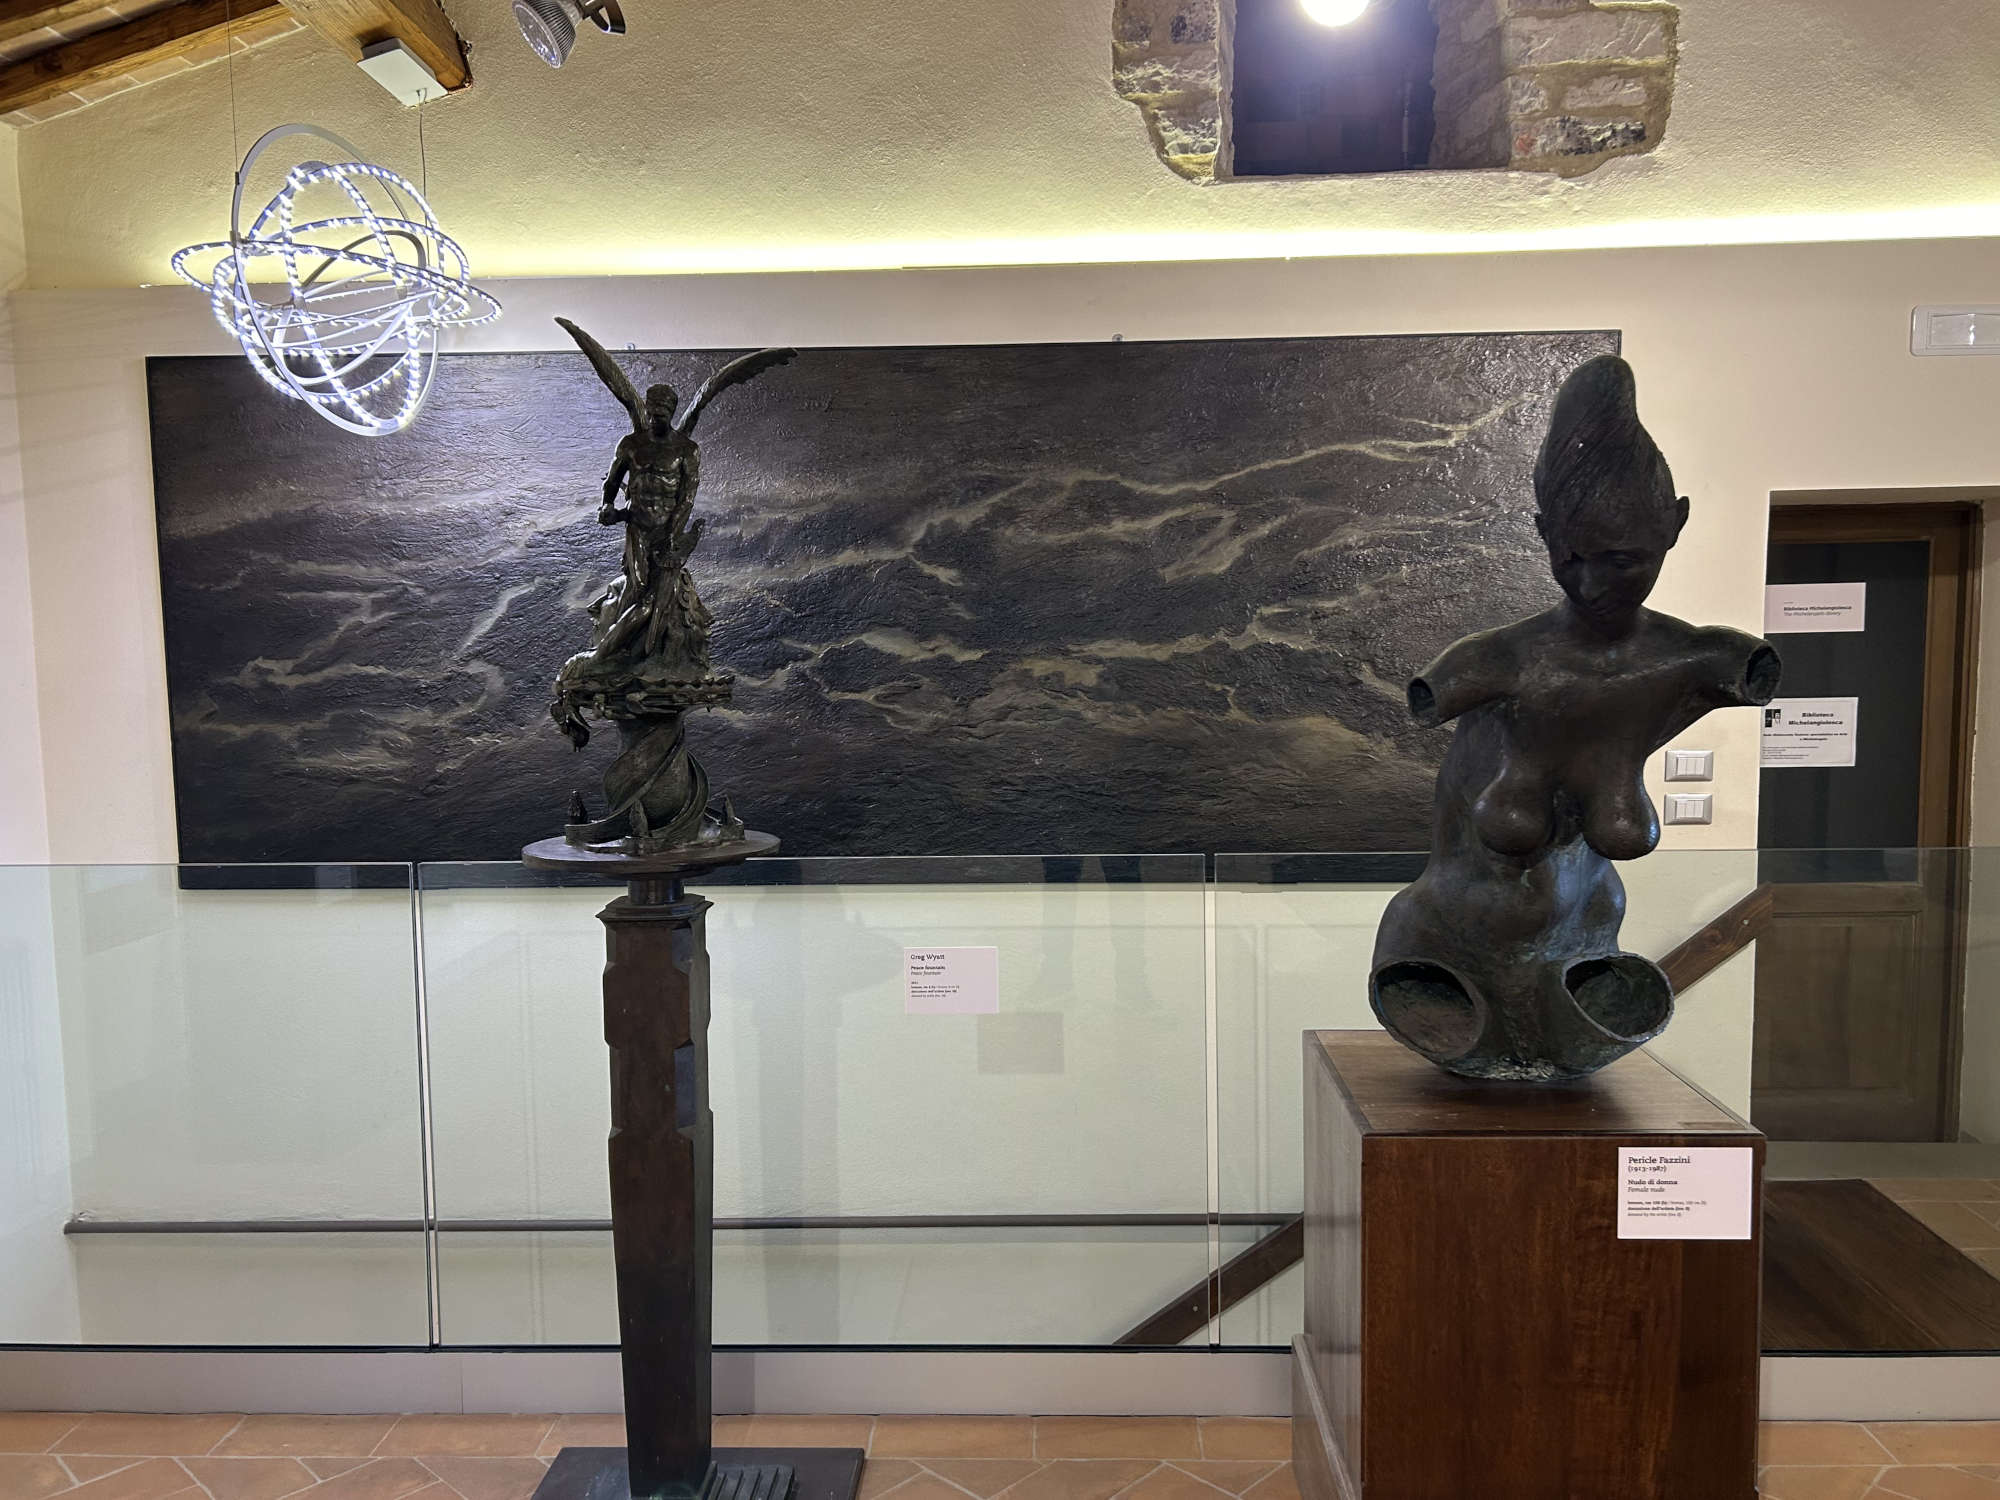 Works acquired through competitions and donations, in the foreground a bronze by Pericle Fazzini